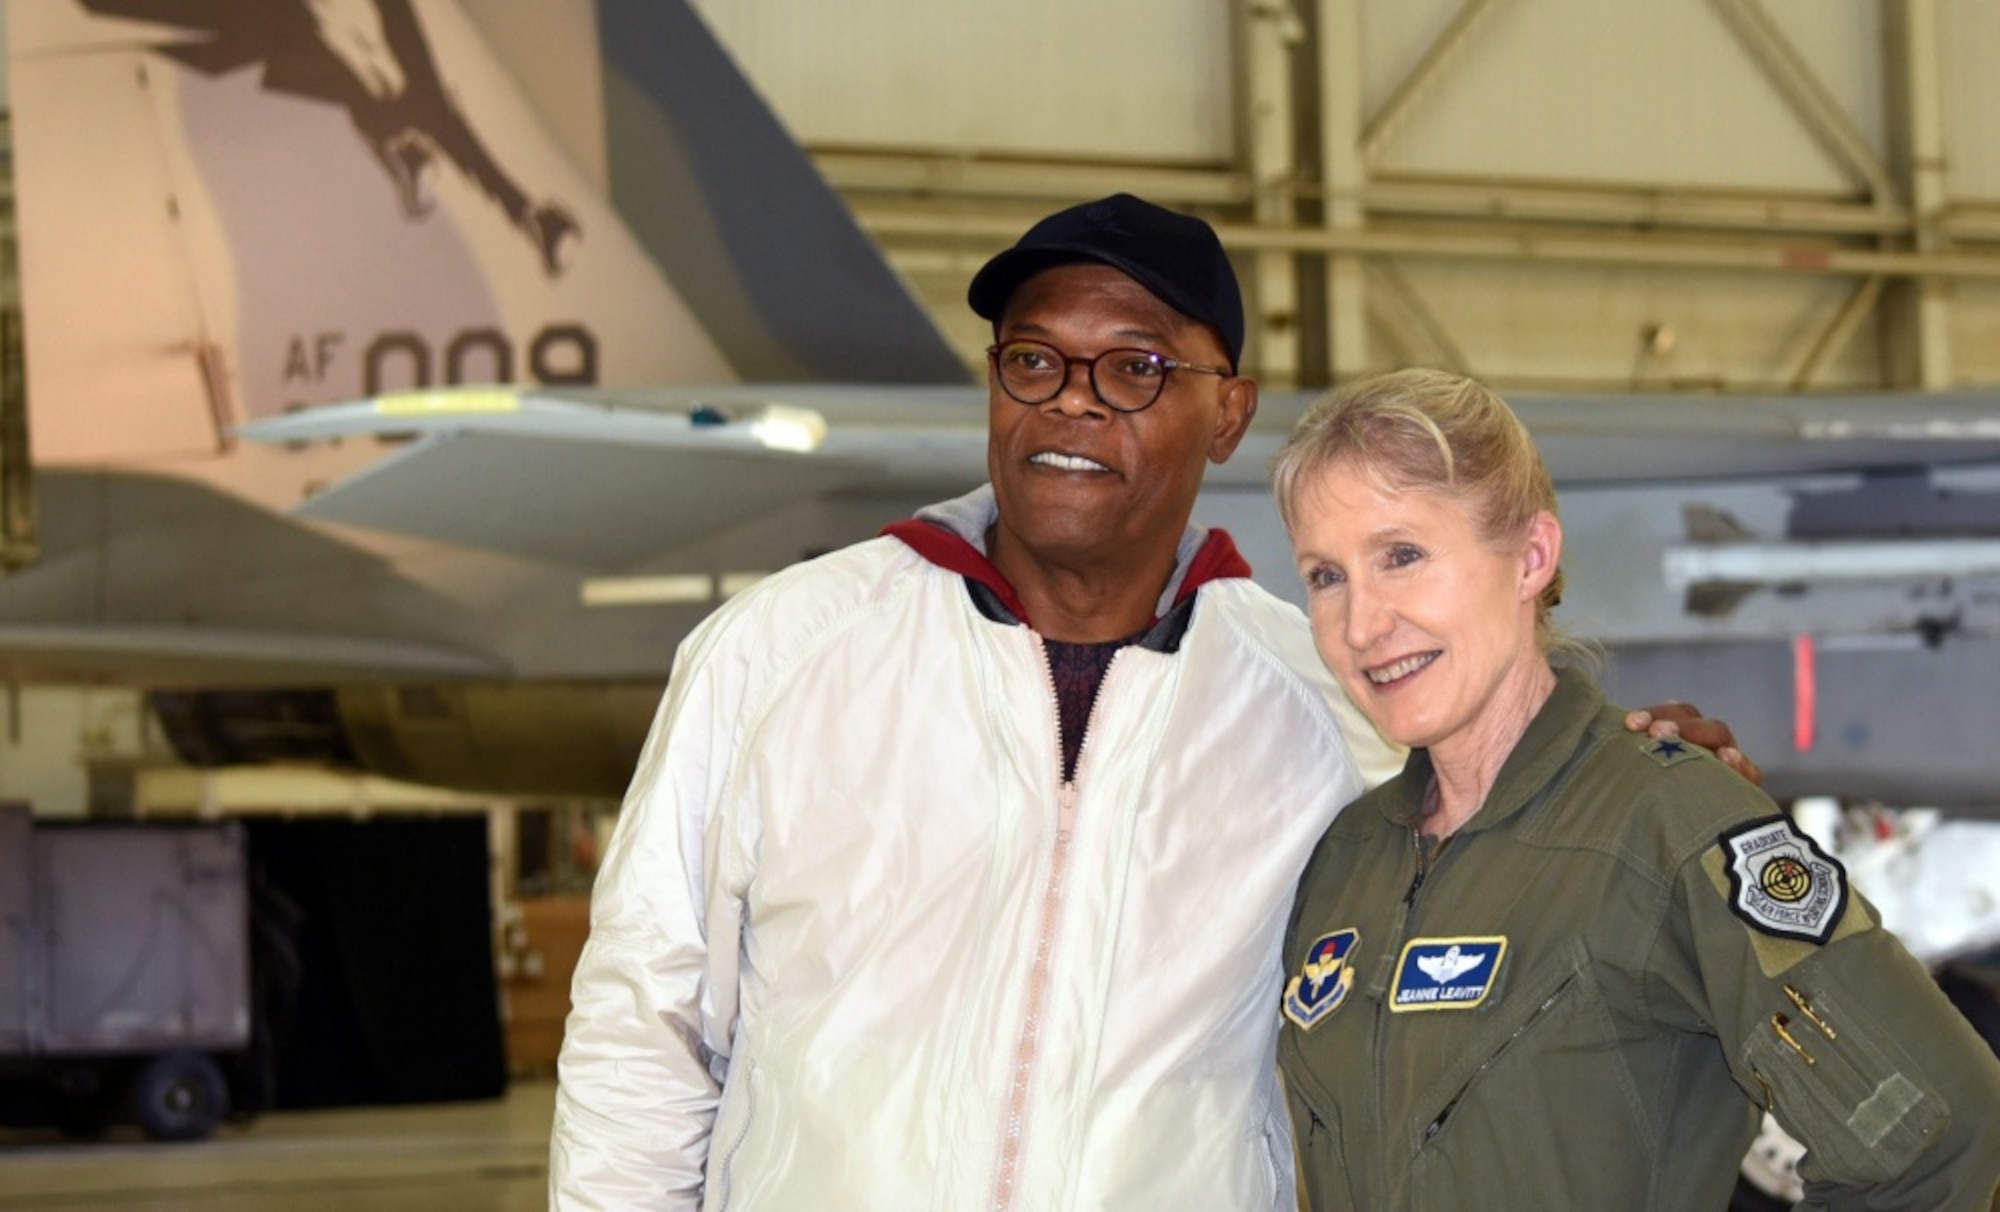 Actor Samuel L. Jackson poses with Gen. Jeannie Leavitt after receiving a challenge coin from her during a media event for "Captain Marvel" at Edwards Air Force Base, Calif., Feb. 20, 2019. Leavitt, the first Air Force female fighter pilot, was a consultant on the movie, and Jackson reprised his Nick Fury role. (DoD photo by Shannon Collins)